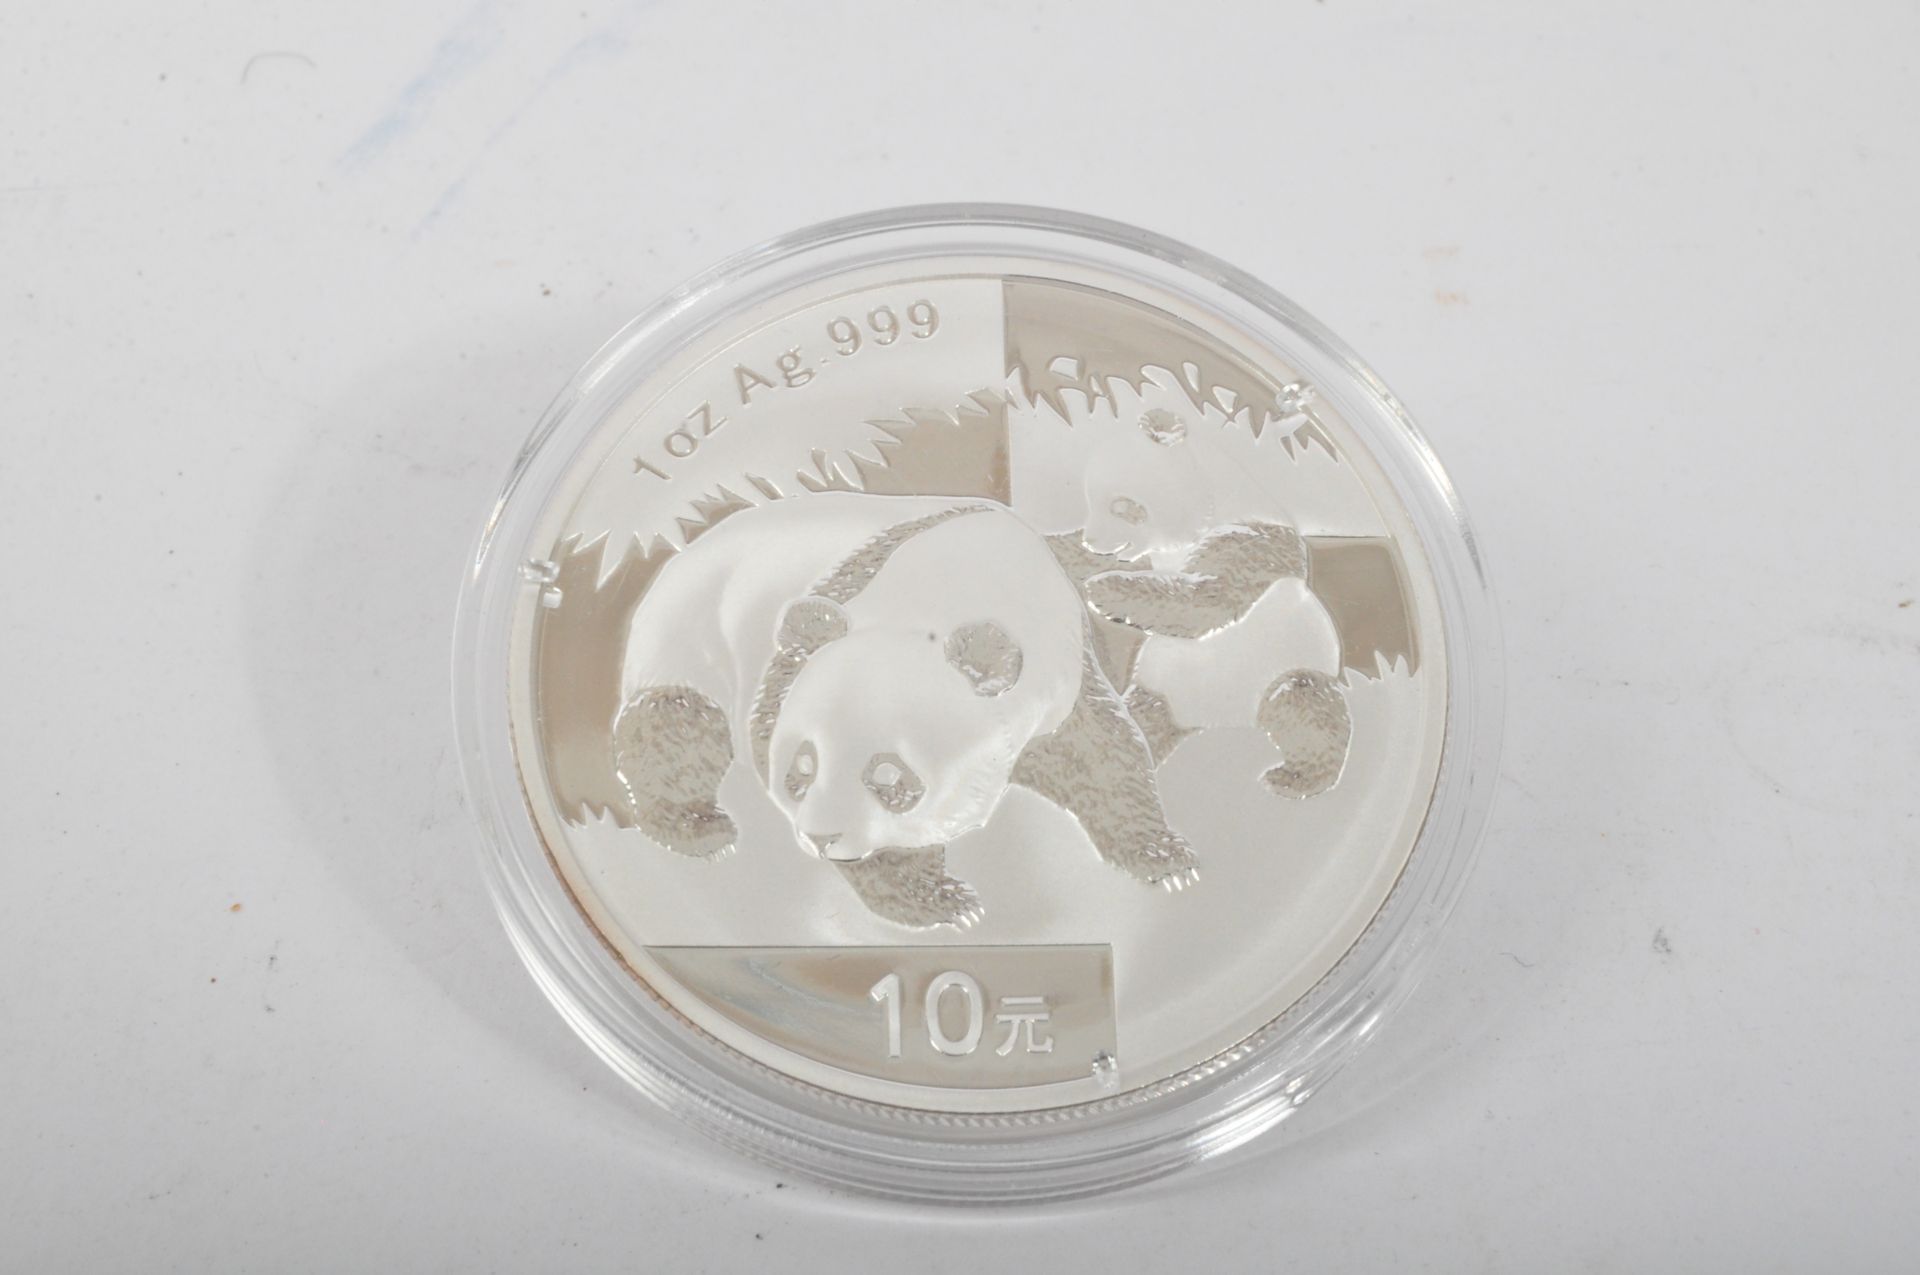 WESTMINSTER COLLECTION - PANDA CHINA SILVER COIN COLLECTION - Bild 25 aus 41